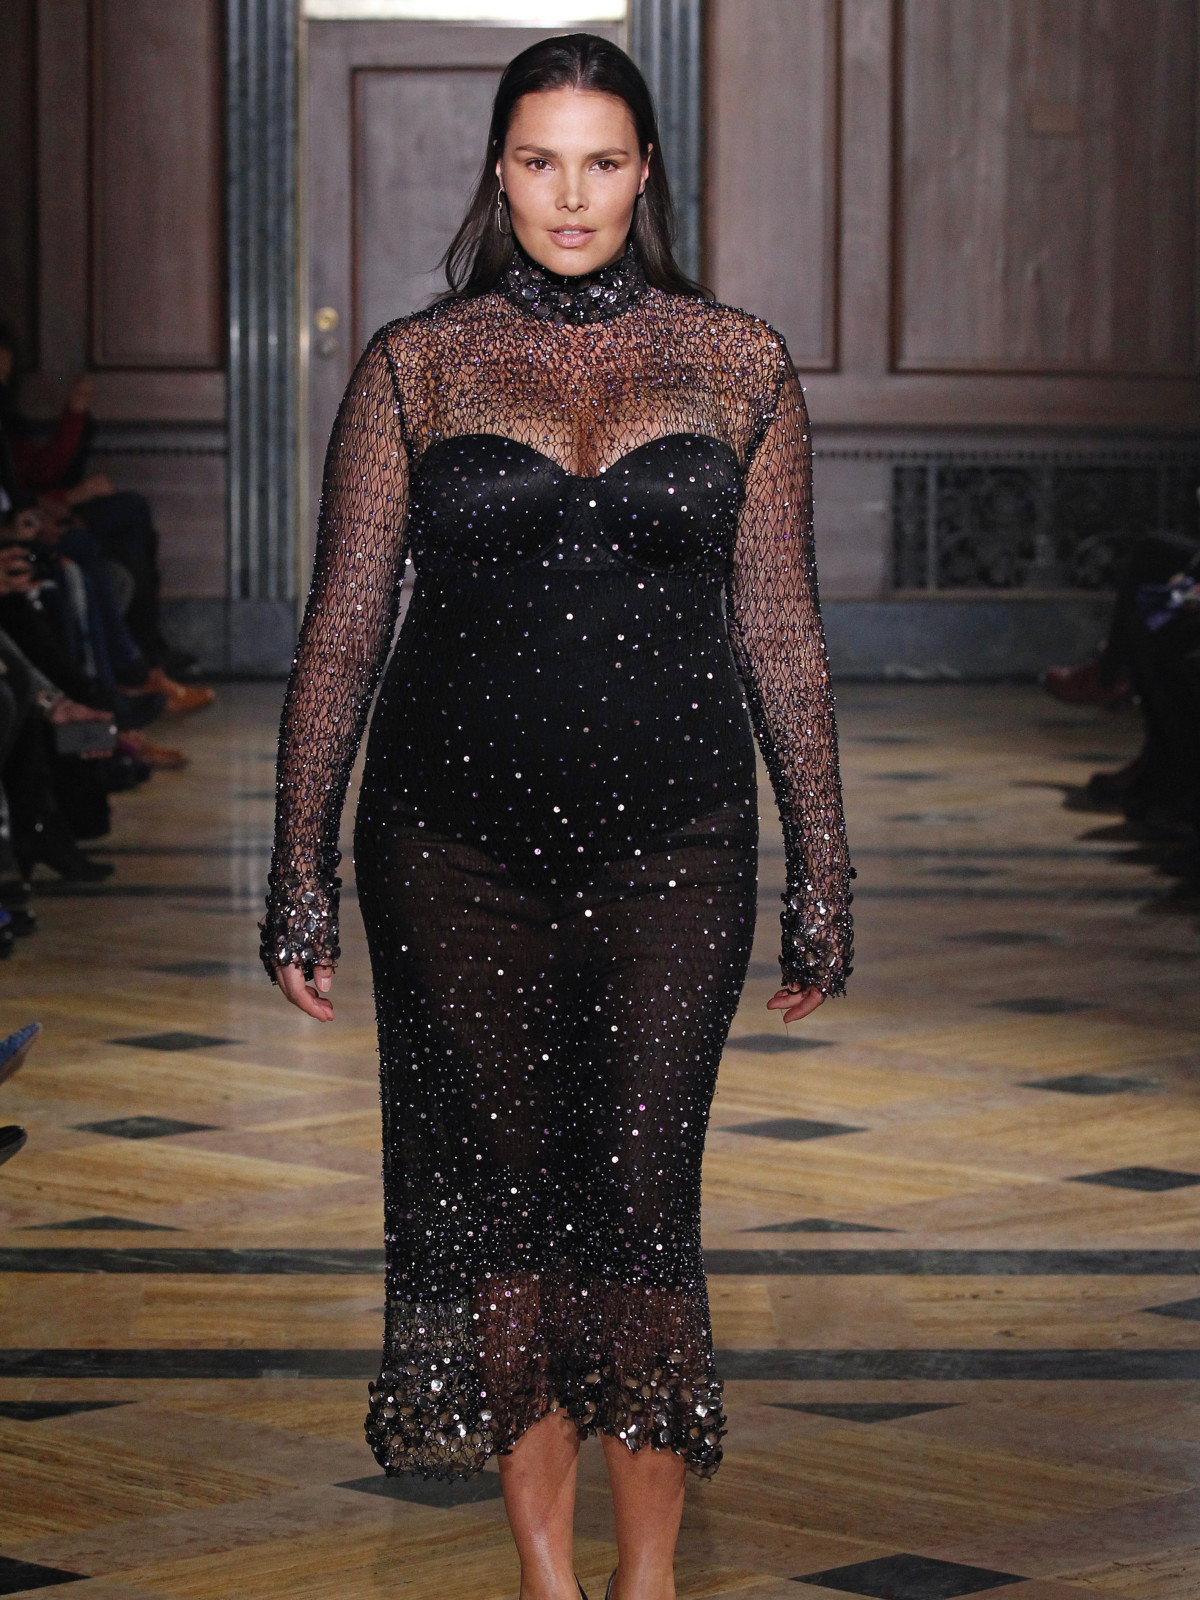 Saucy French designer unveils dramatic glam looks for all sizes ...